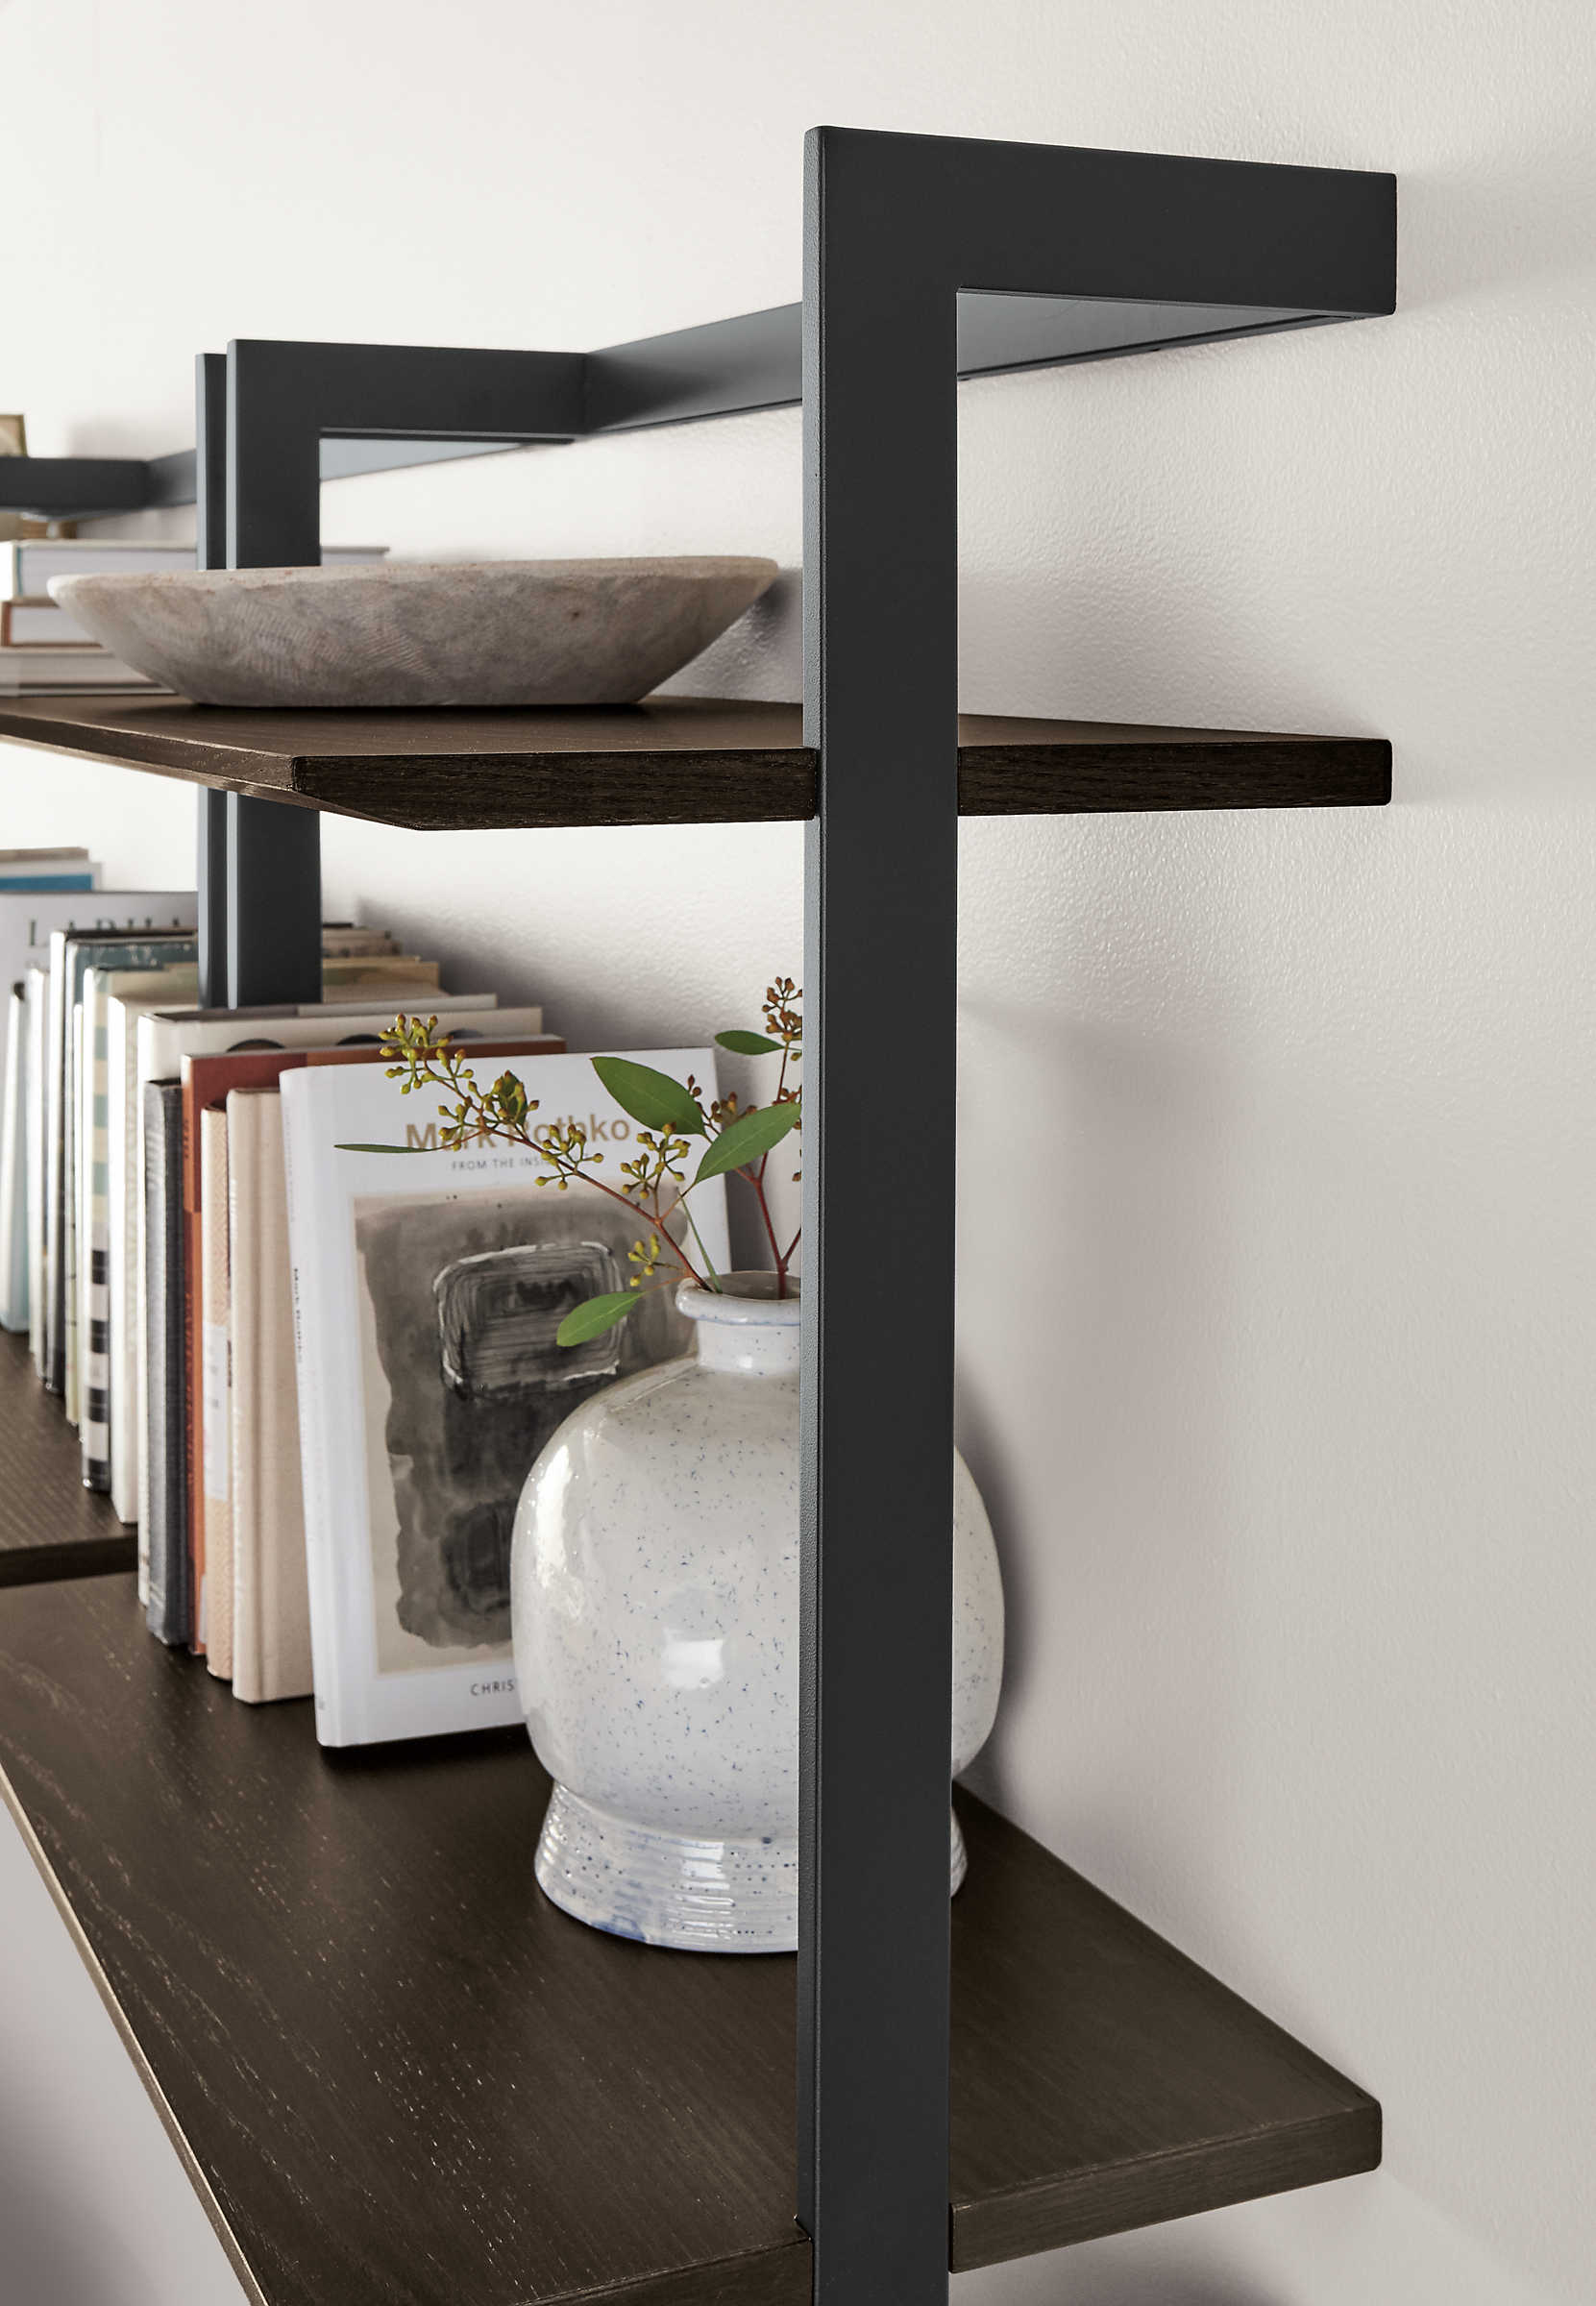 Detail of Beam leaning console bookcase